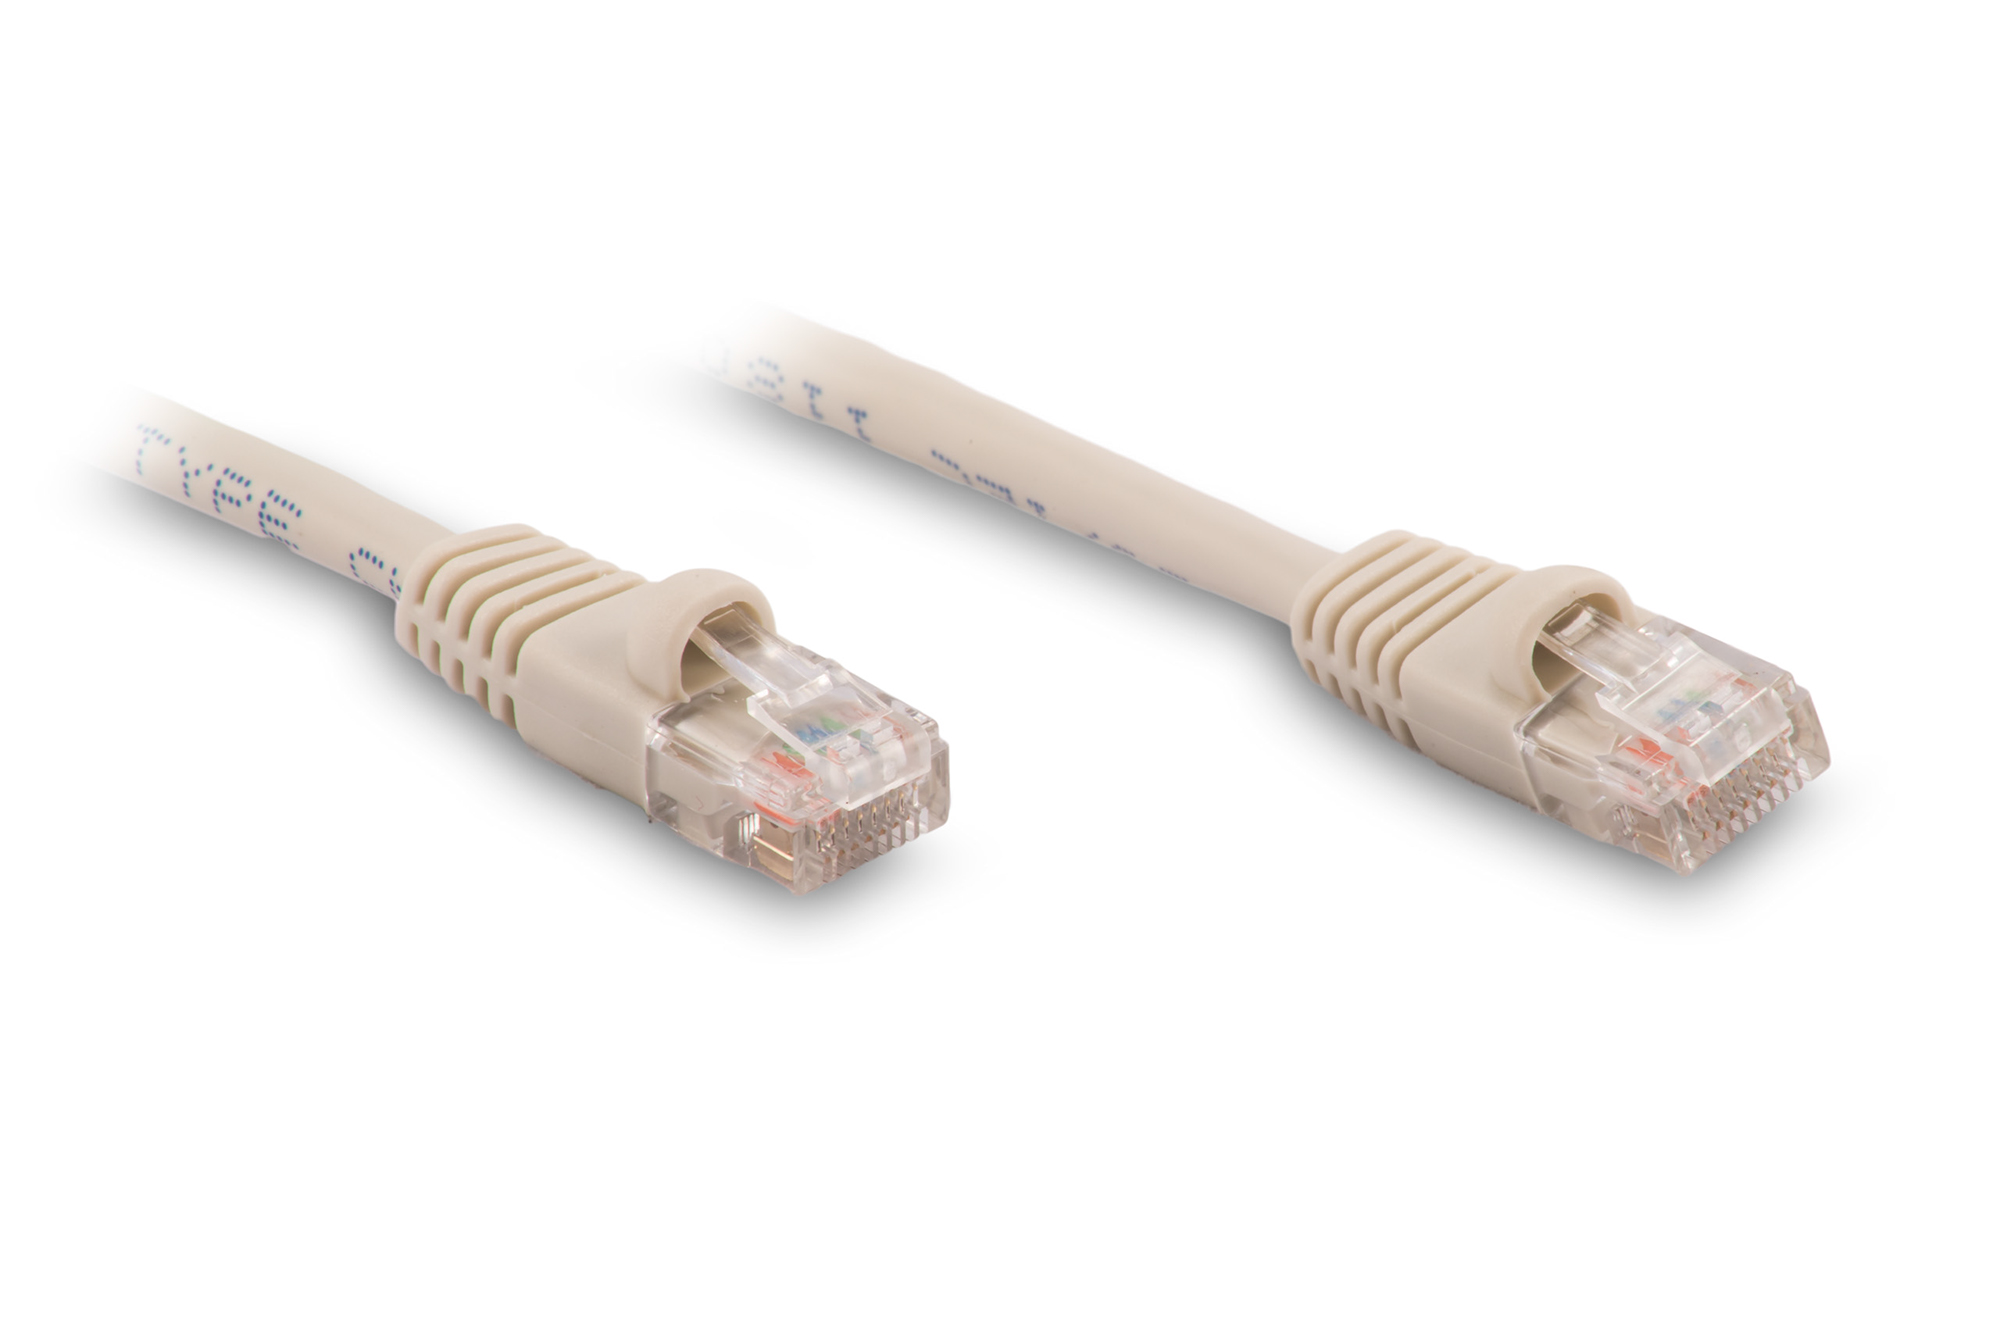 8ft Cat6 Ethernet Patch Cable - Gray Color - Snagless Boot